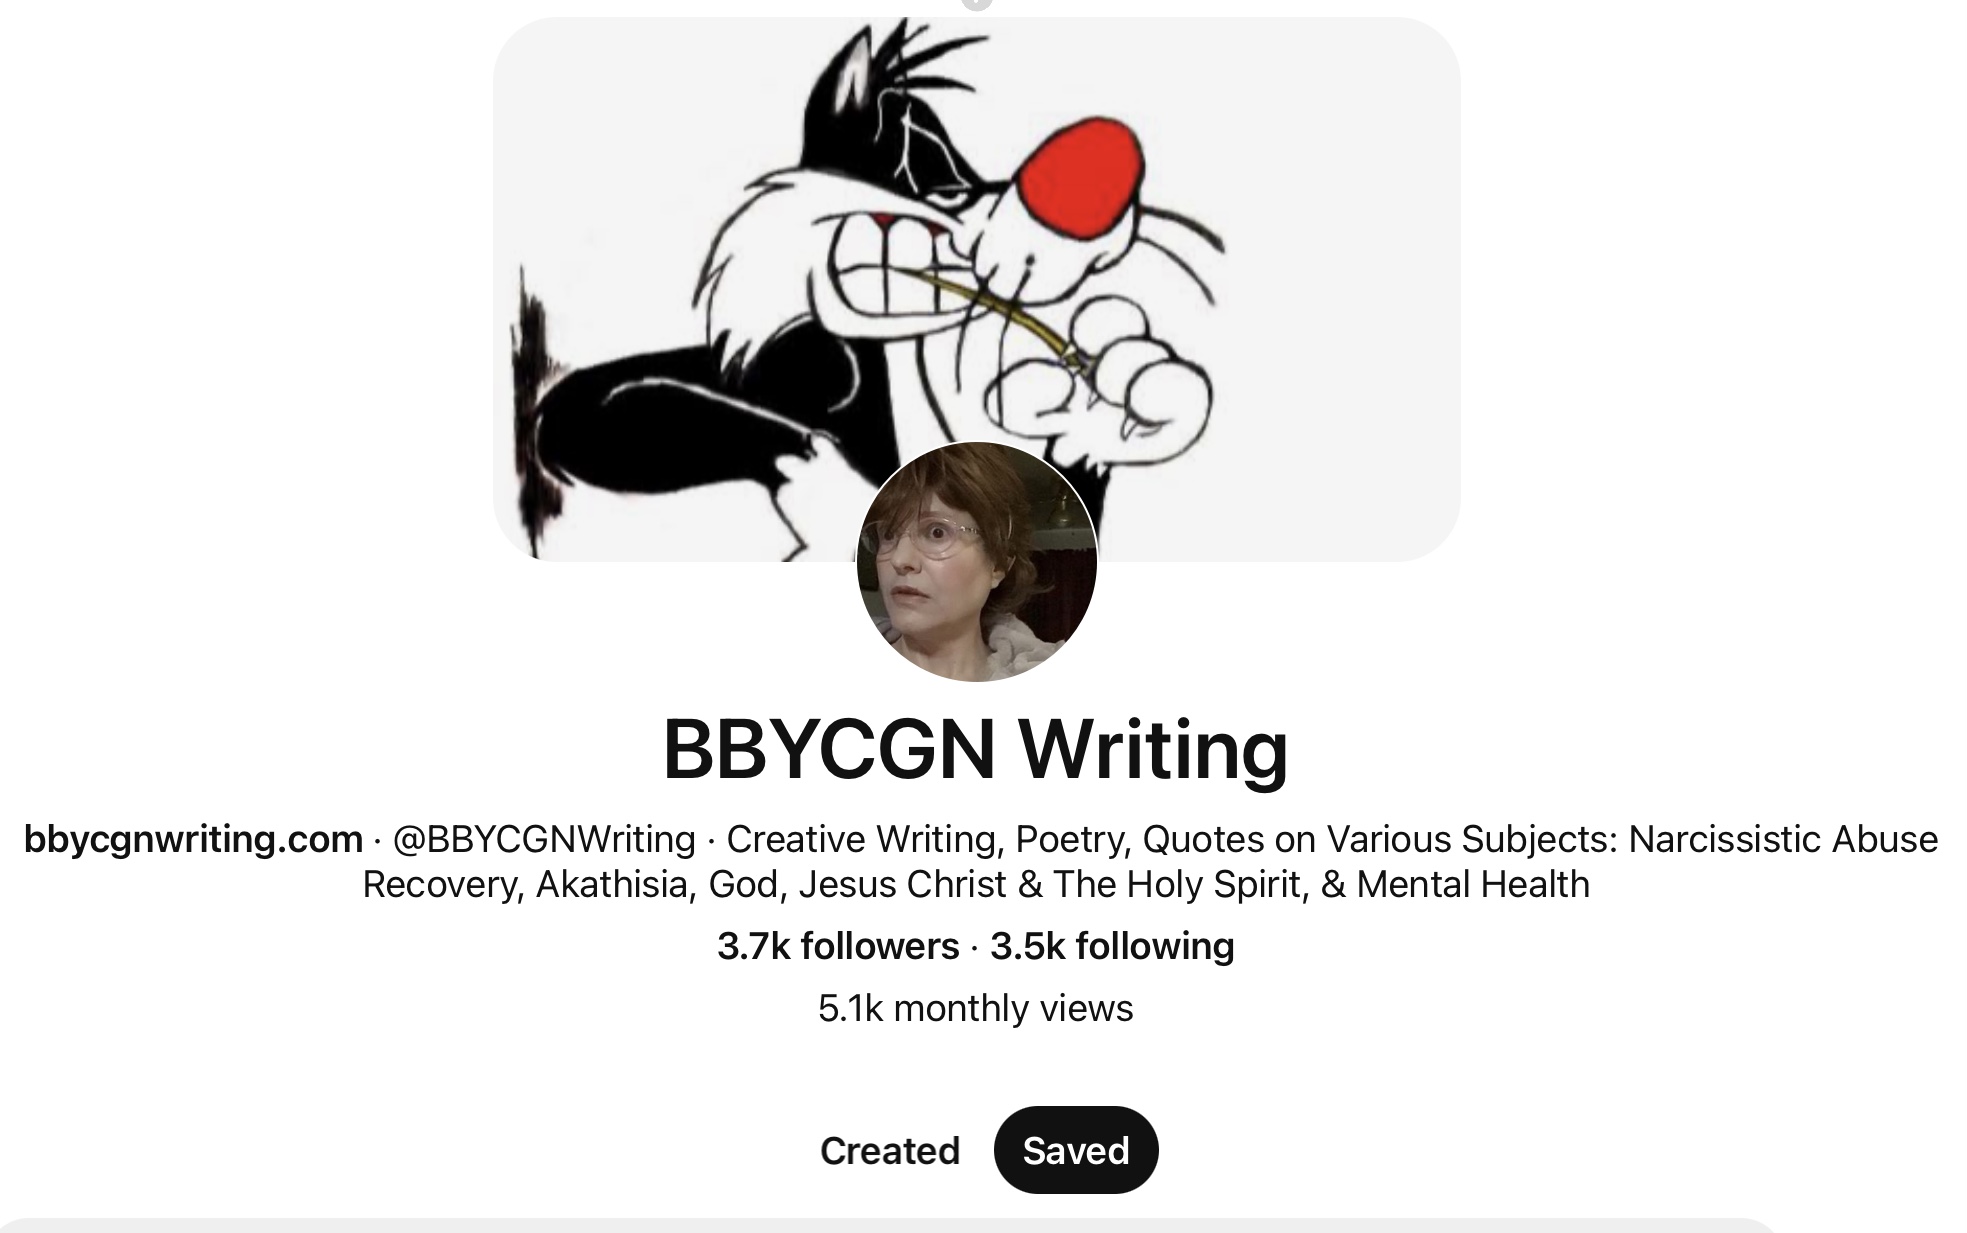 About BBYCGN Writing Blog